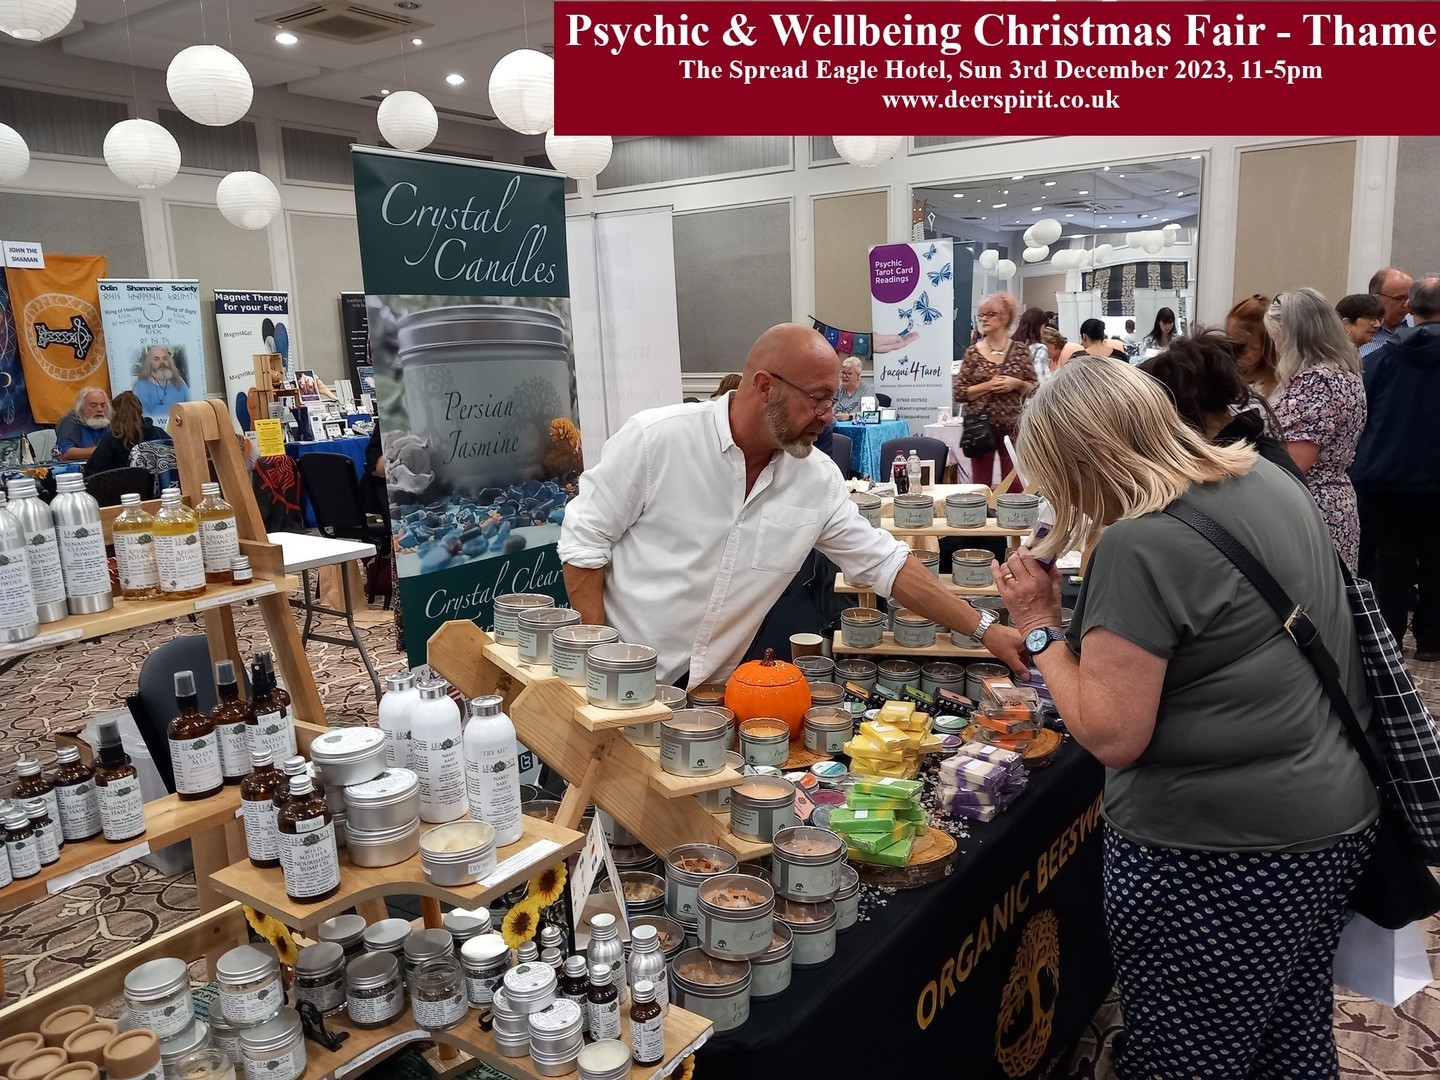 Psychic and Wellbeing Christmas Fair - Thame, Thame, England, United Kingdom